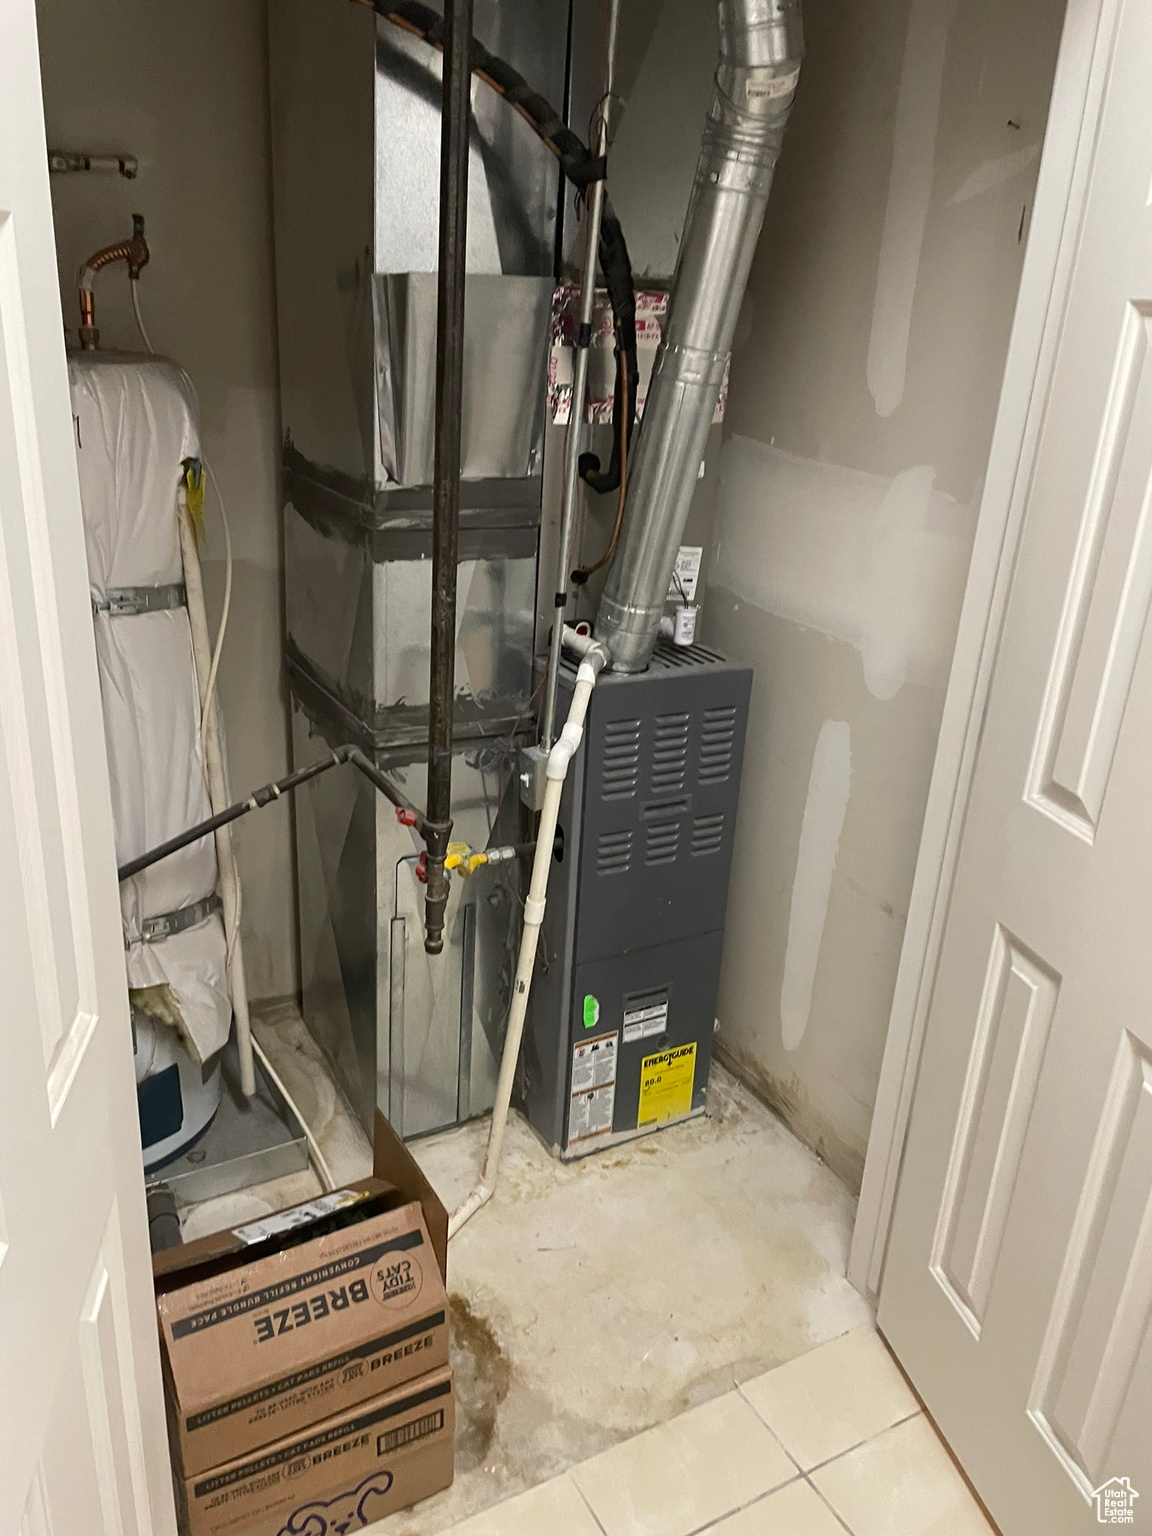 FURNACE AND WATER HEATER